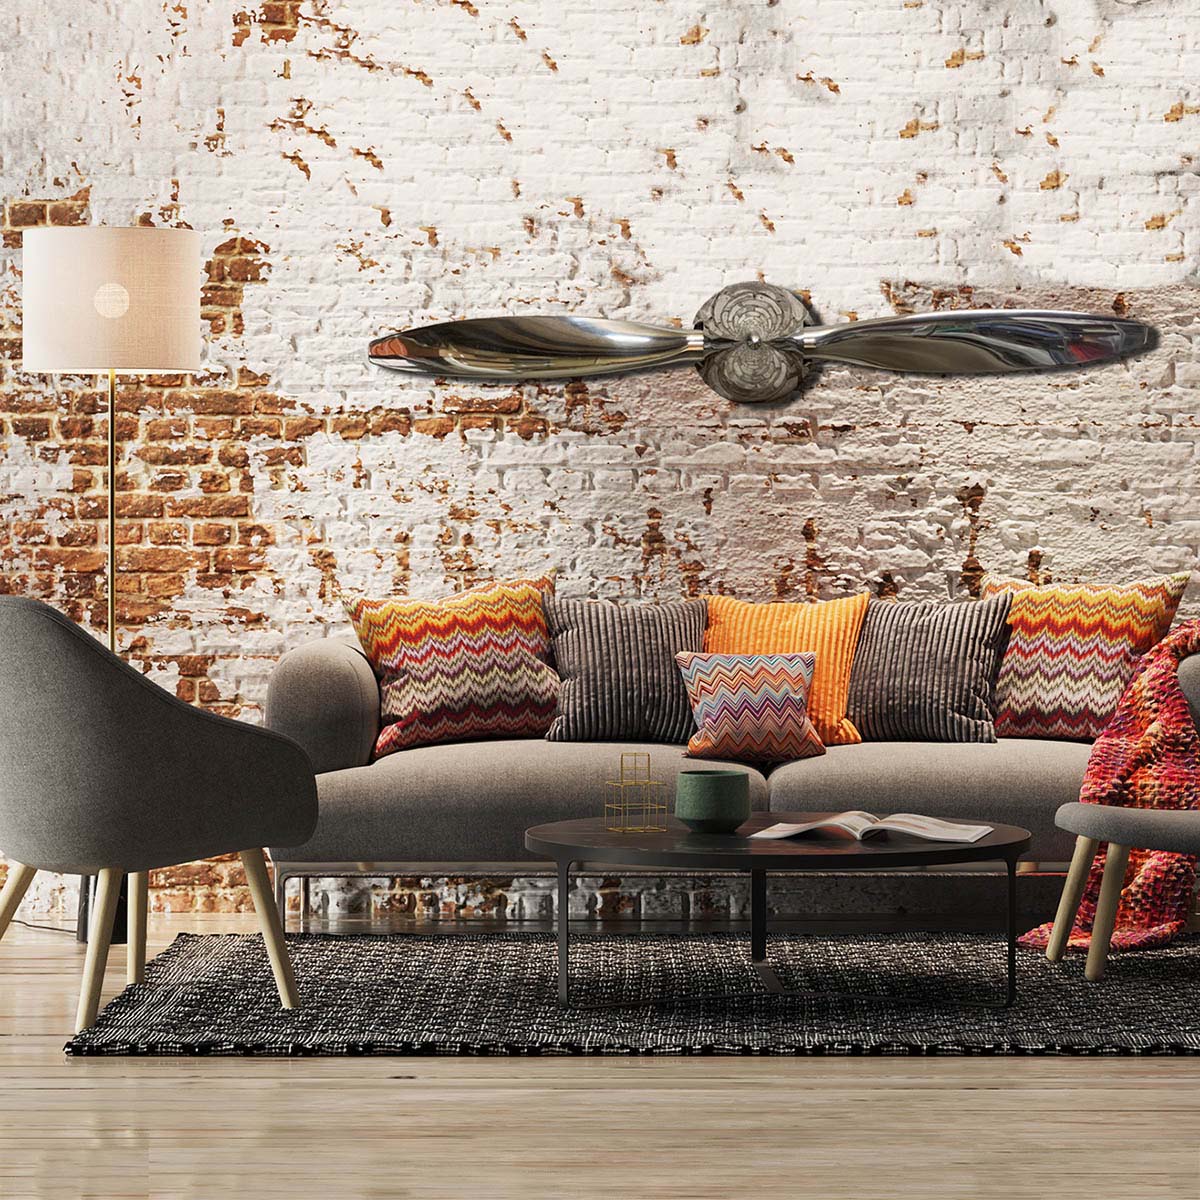 Mirror polished Hartzell propeller and spinner mounted on a wall in an living room.